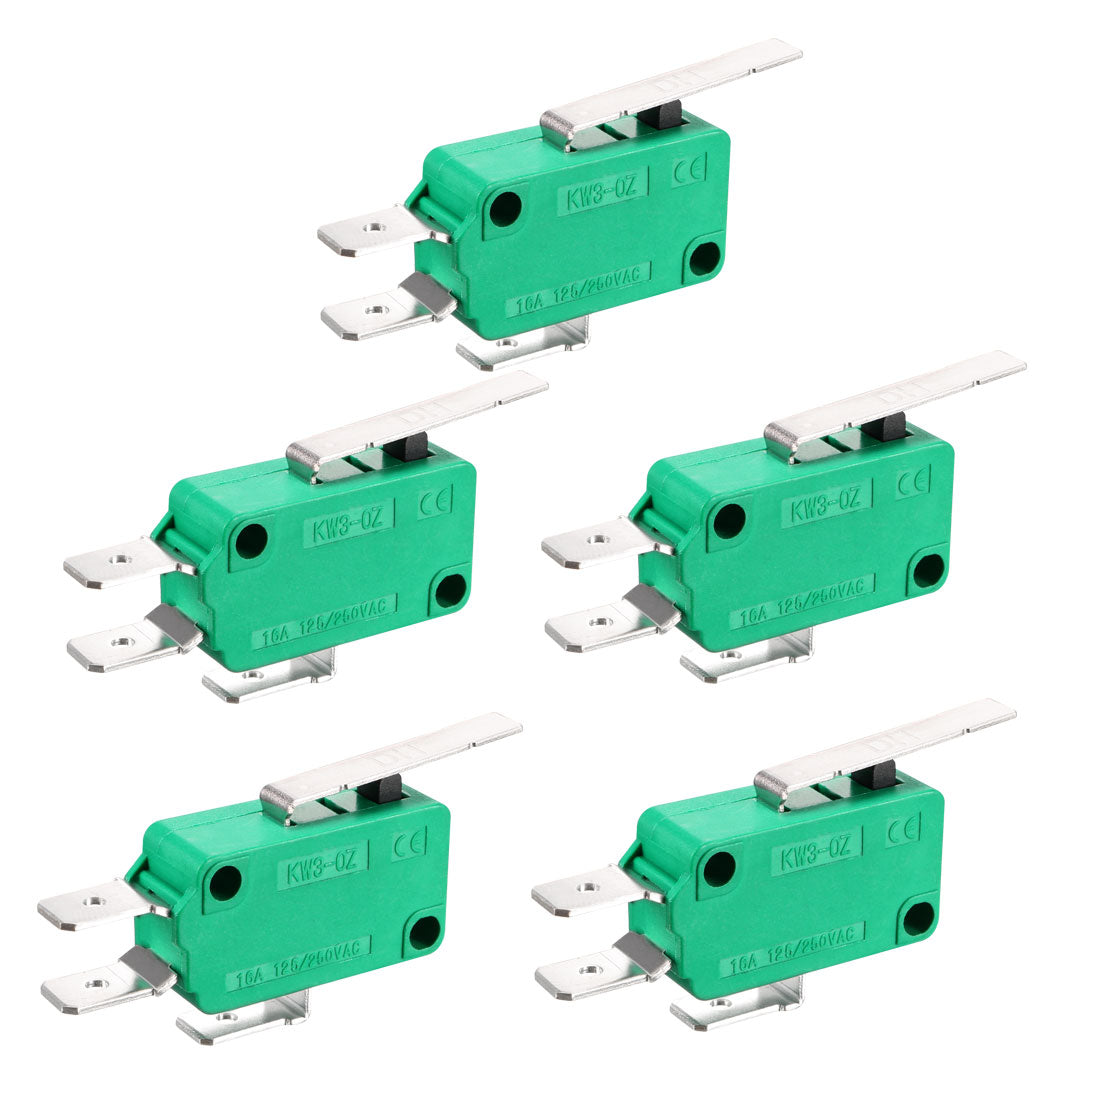 uxcell Uxcell 5PCS KW3-OZ 16A 125/250VAC SPDT NO NC Hinge Lever Type Micro Limit Switches